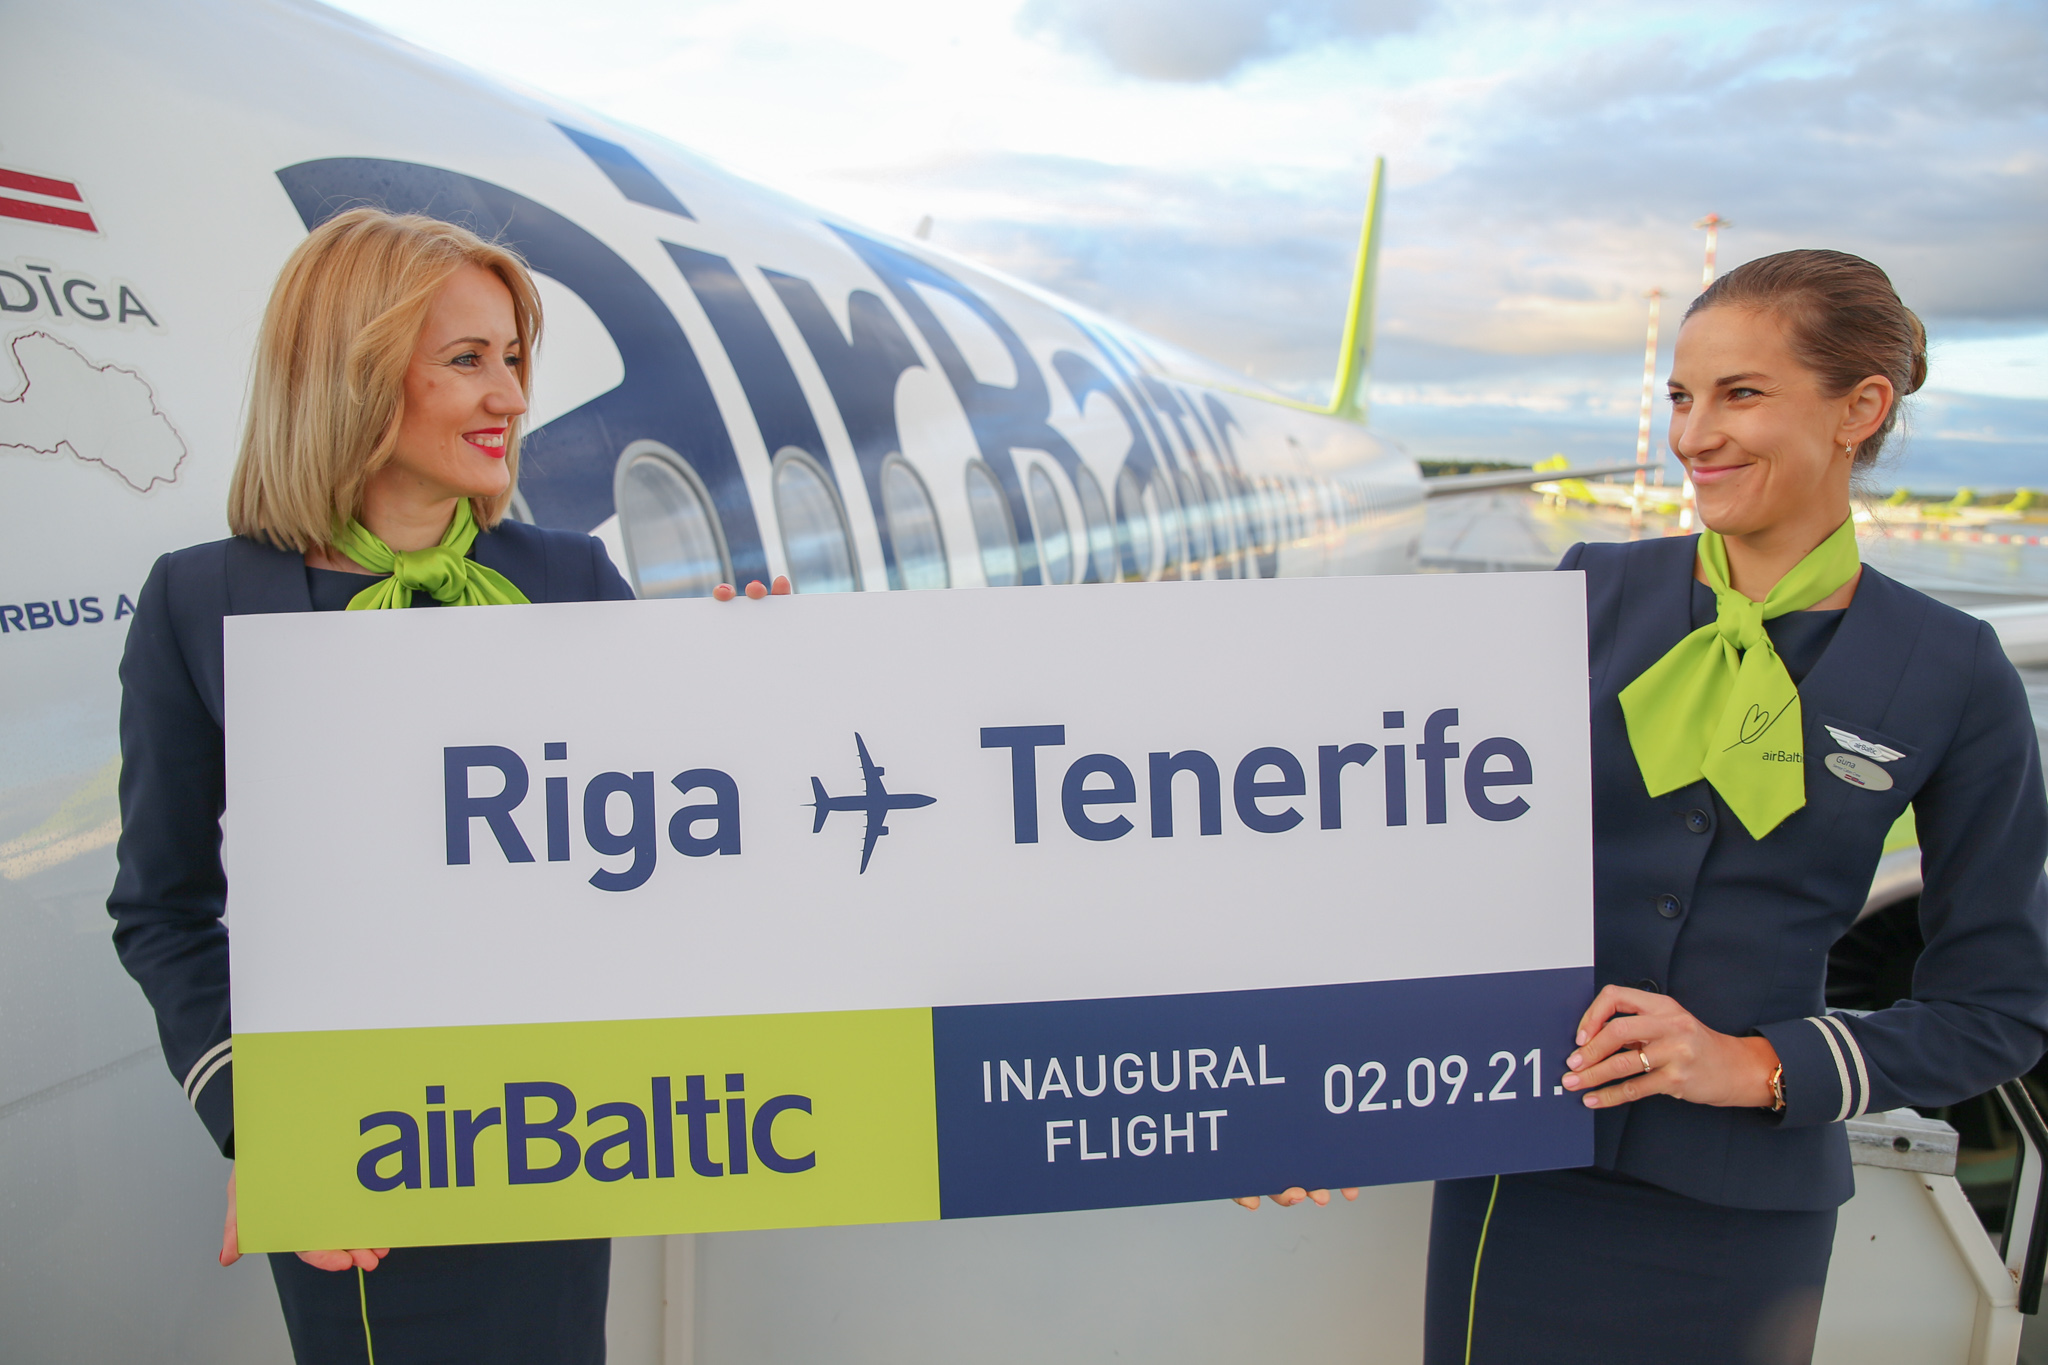 Airline company airBaltic marked record for October demand on the flights